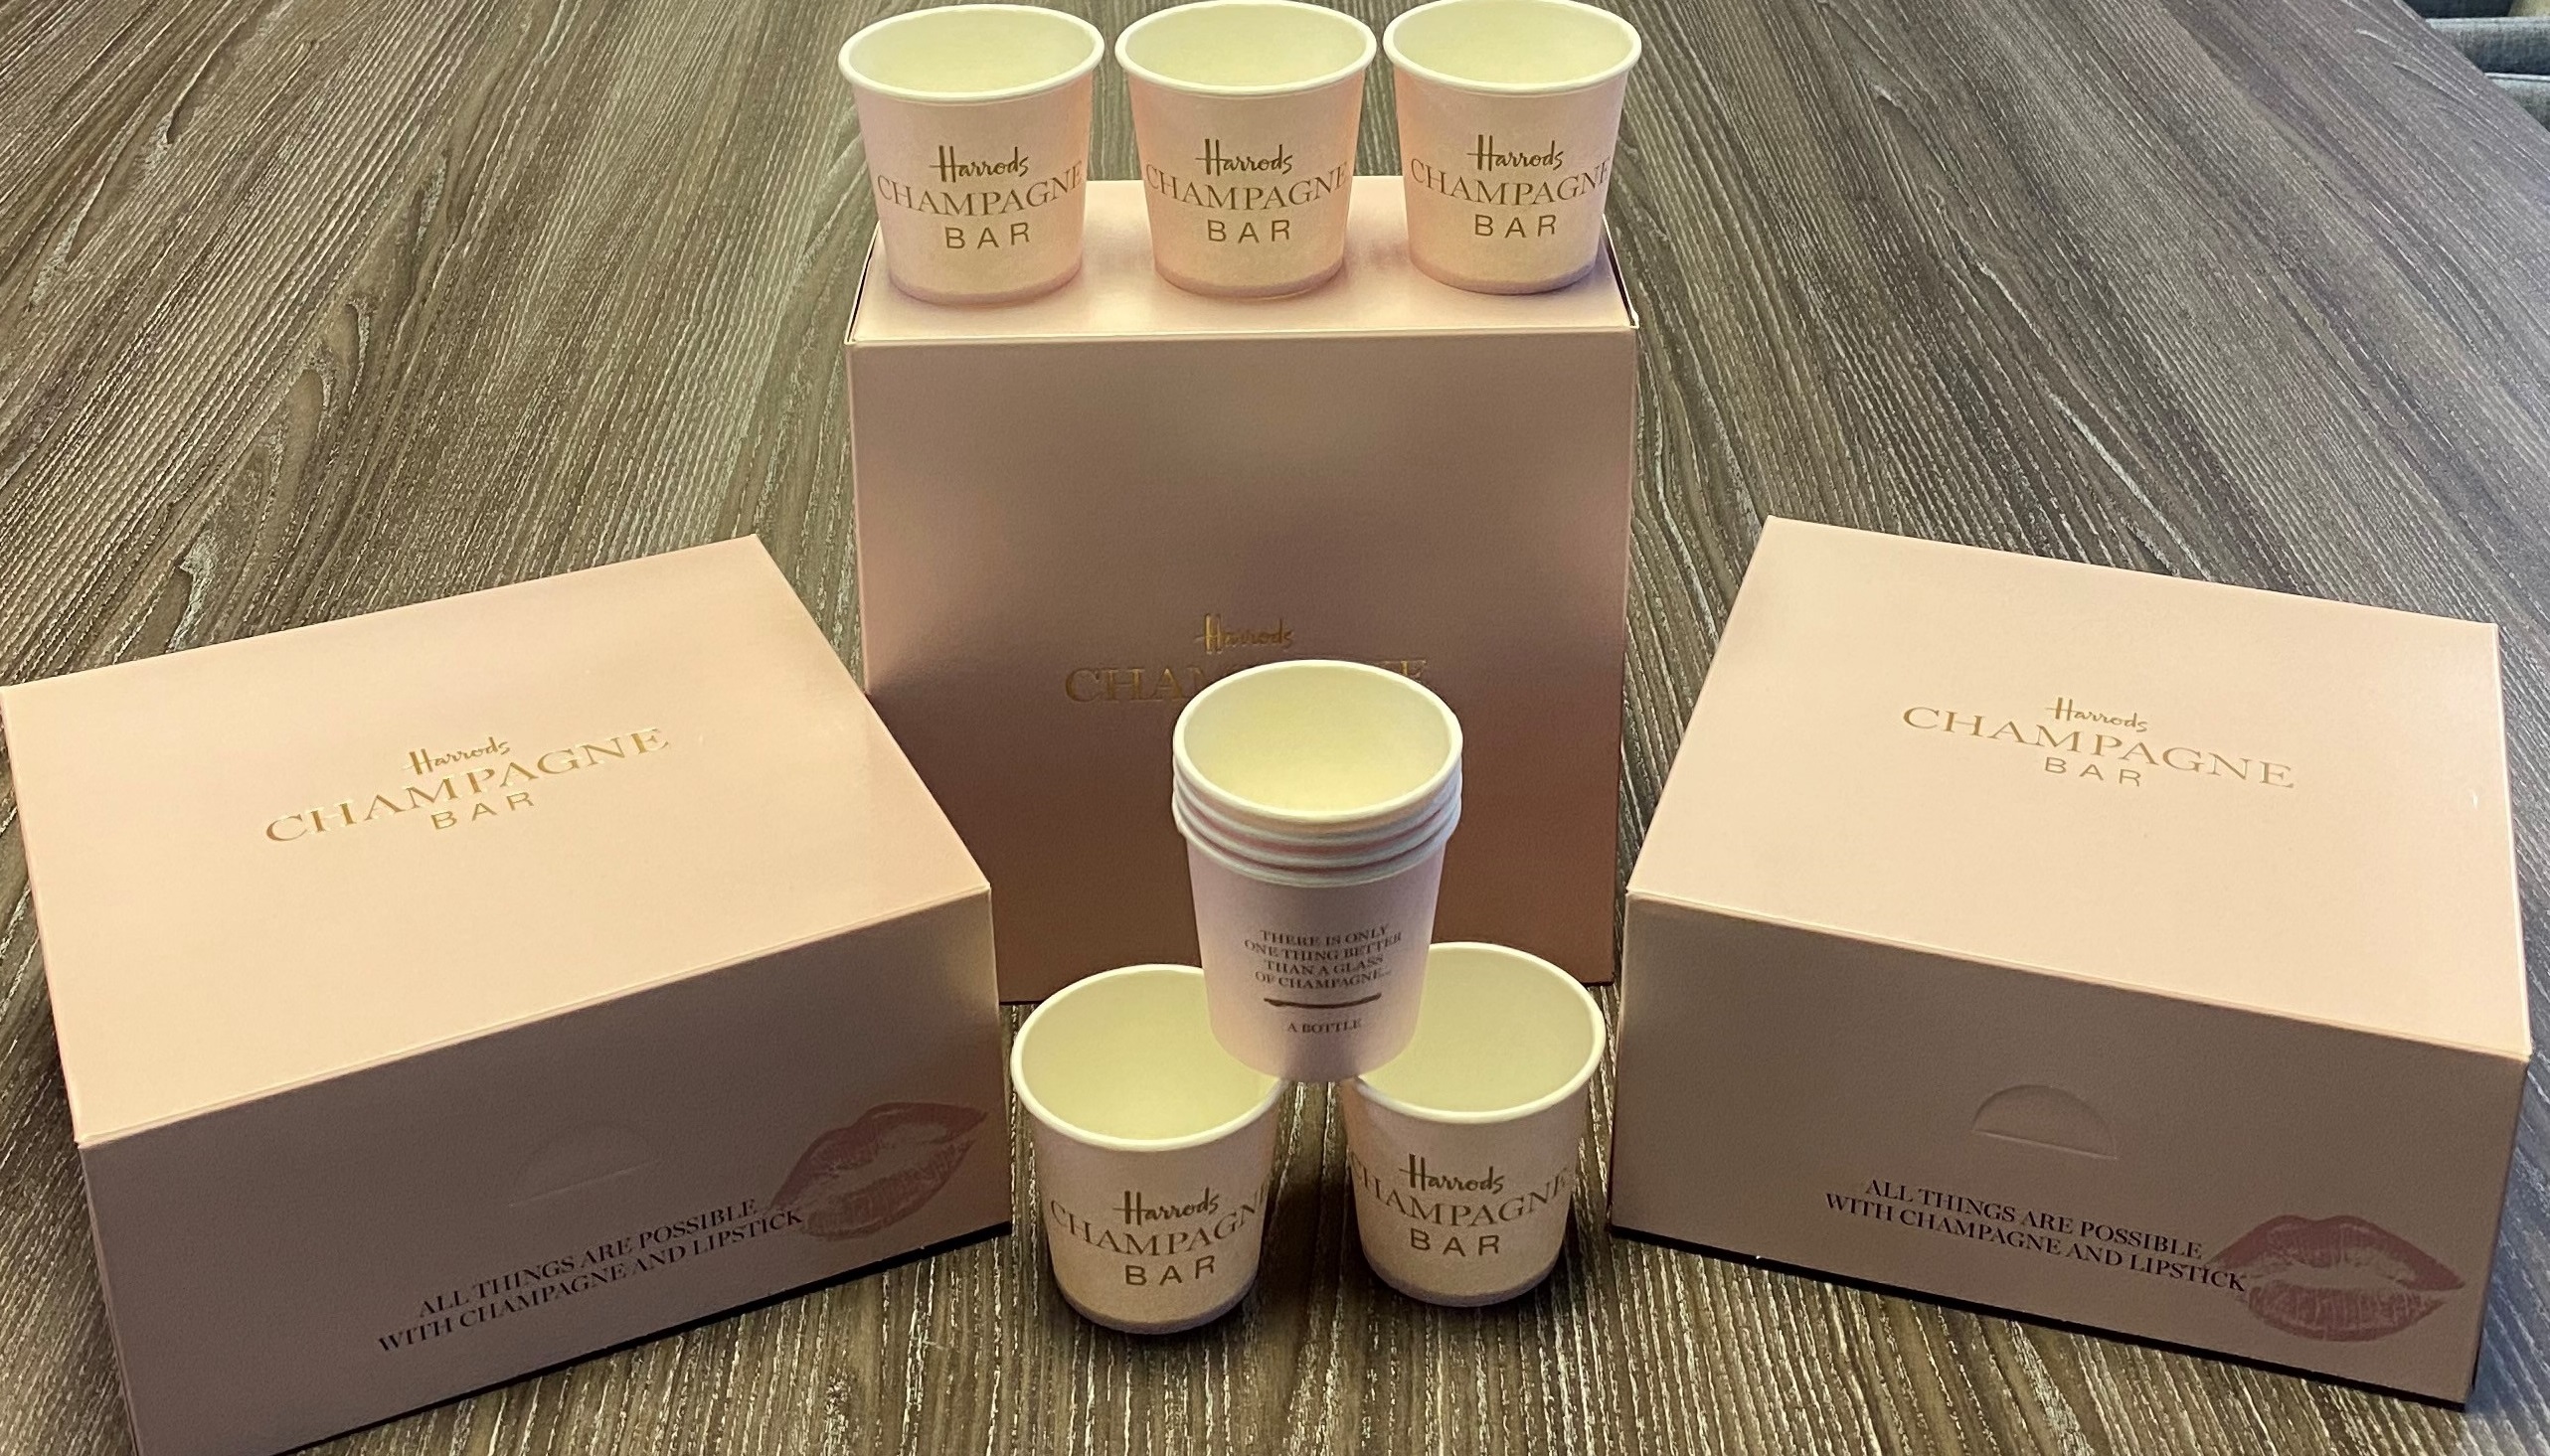 CCS McLAYS SUPPORT HARRODS' H BEAUTY CONCEPT WITH EDINBURGH STORE DEBUT